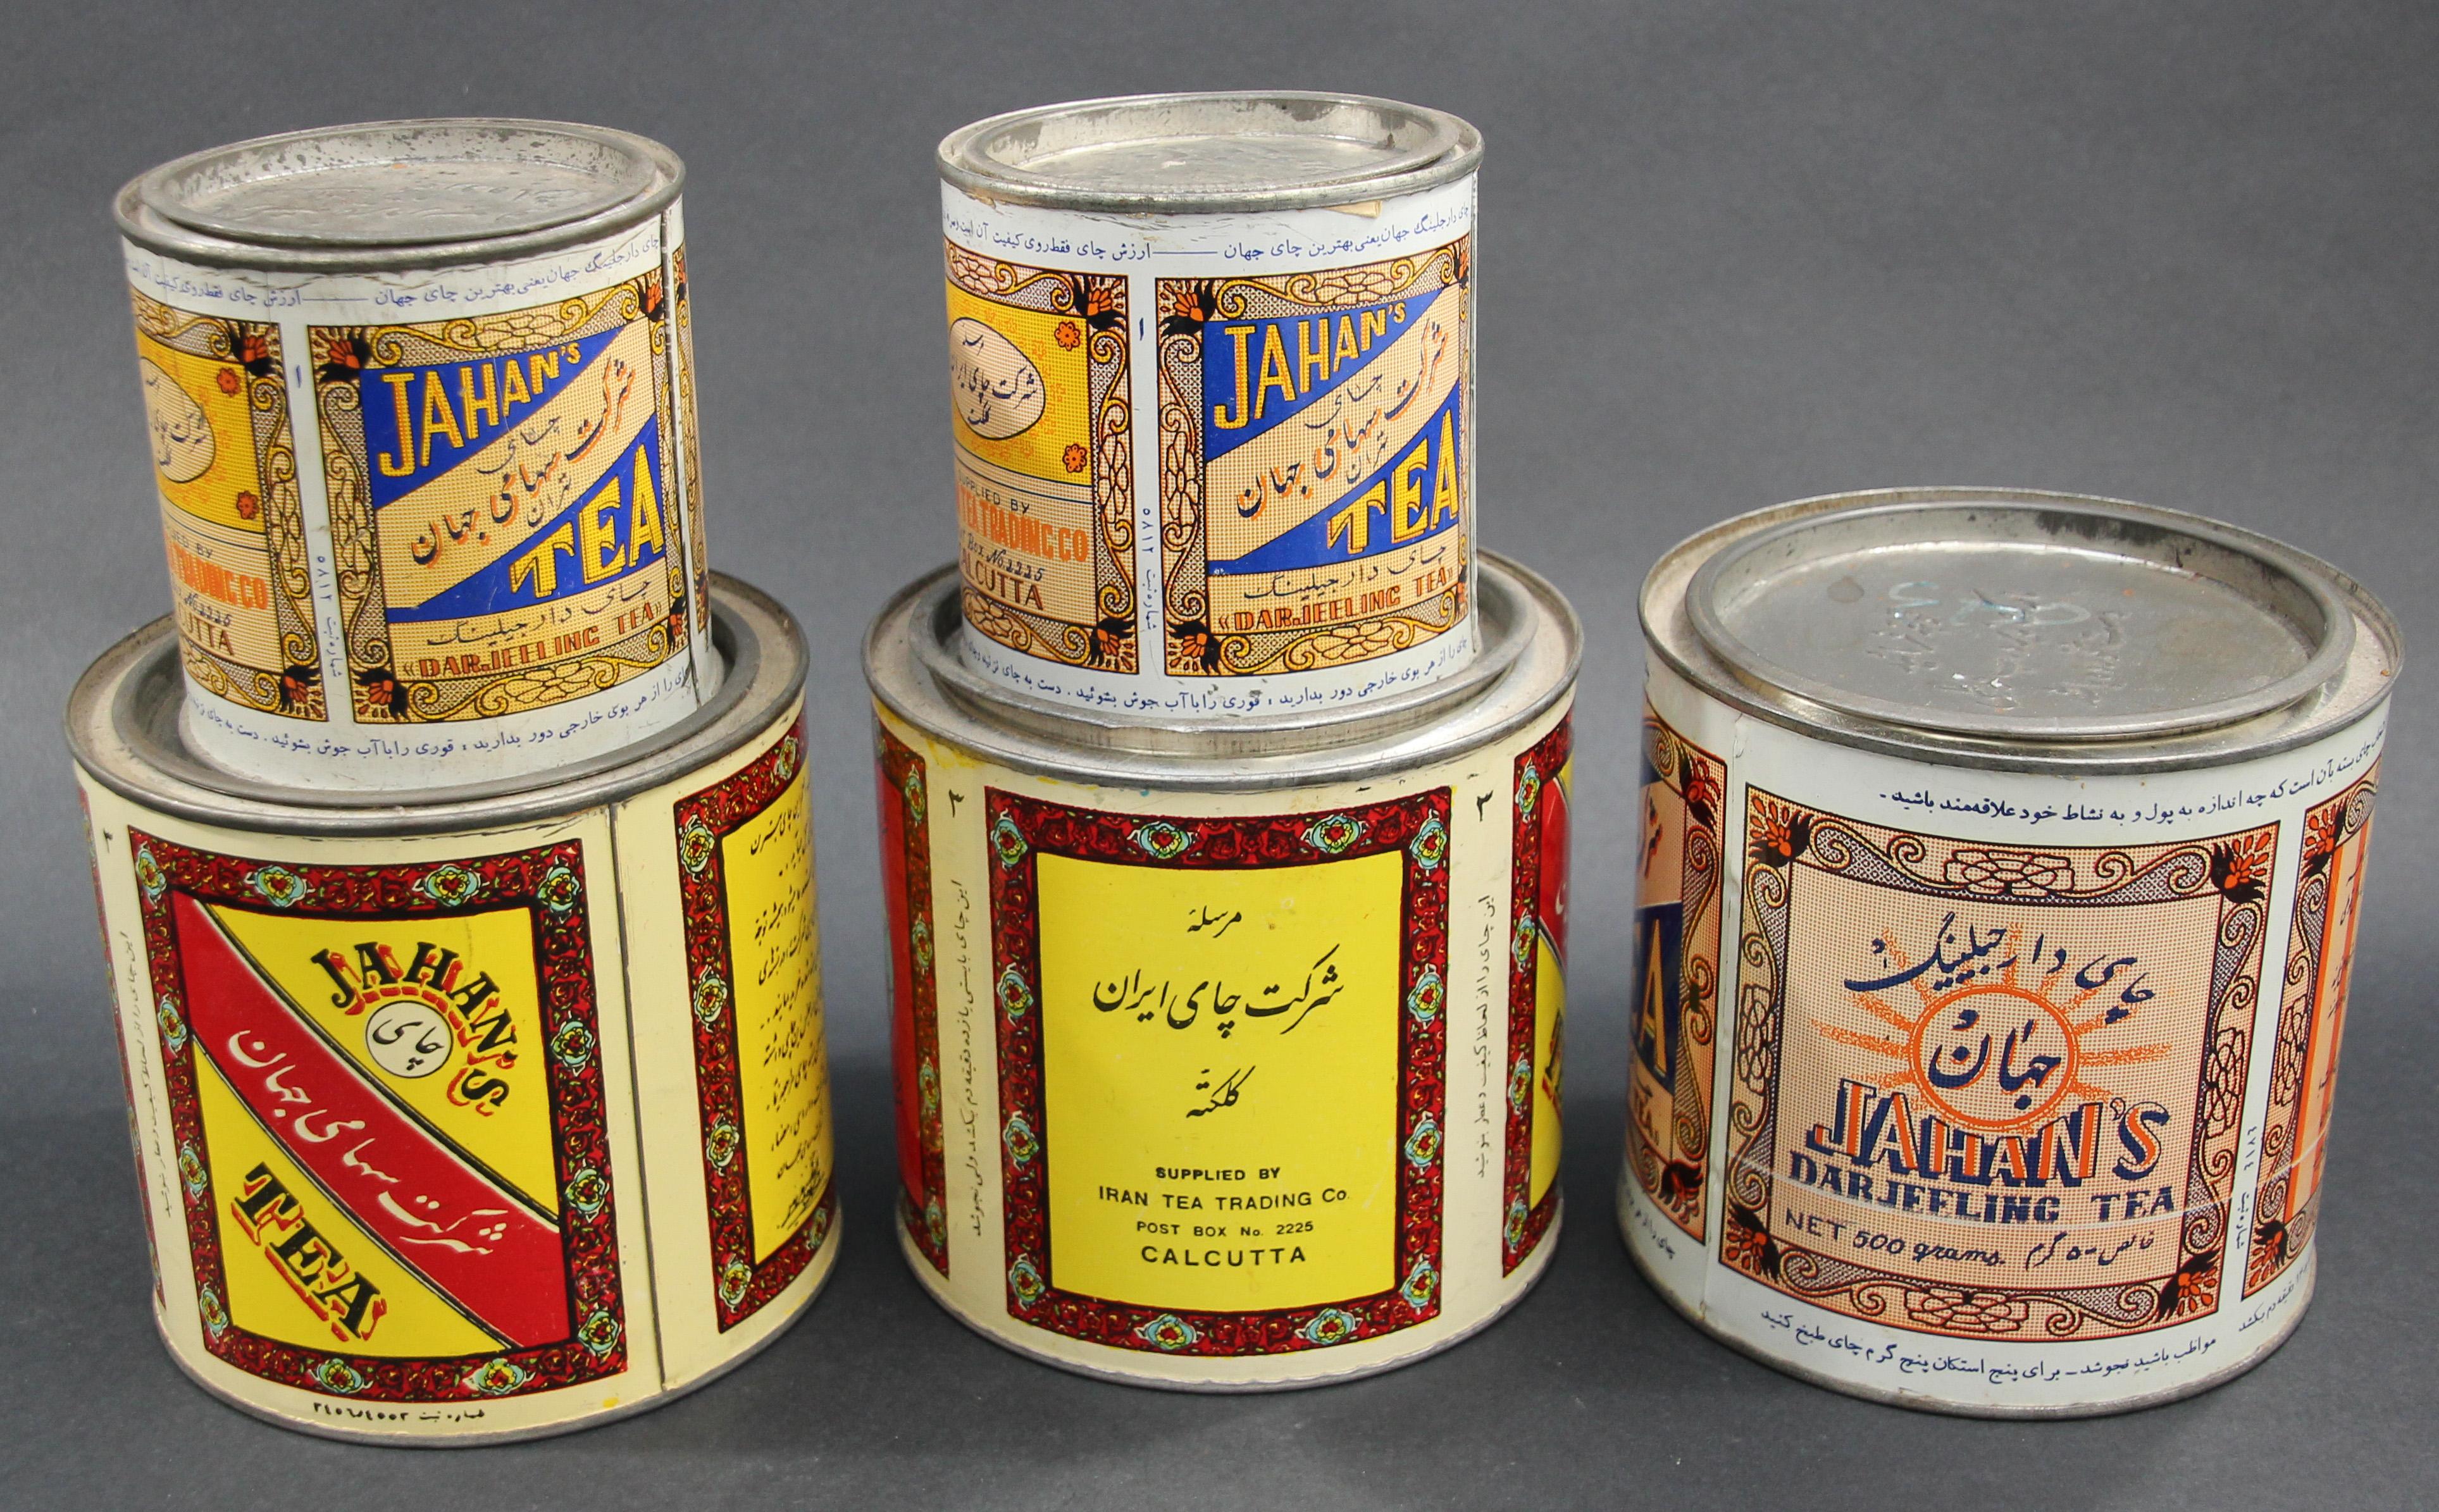 Vintage collectible tin canister Jahan's Tea - Darjeeling Tea. From Calcutta India. 
Advertising collectible tea tin canister India, Jahan's Tea - Darjeeling Tea,  
Vintage collection of 5 Indian tea caddies, boxes decorated with traditional design